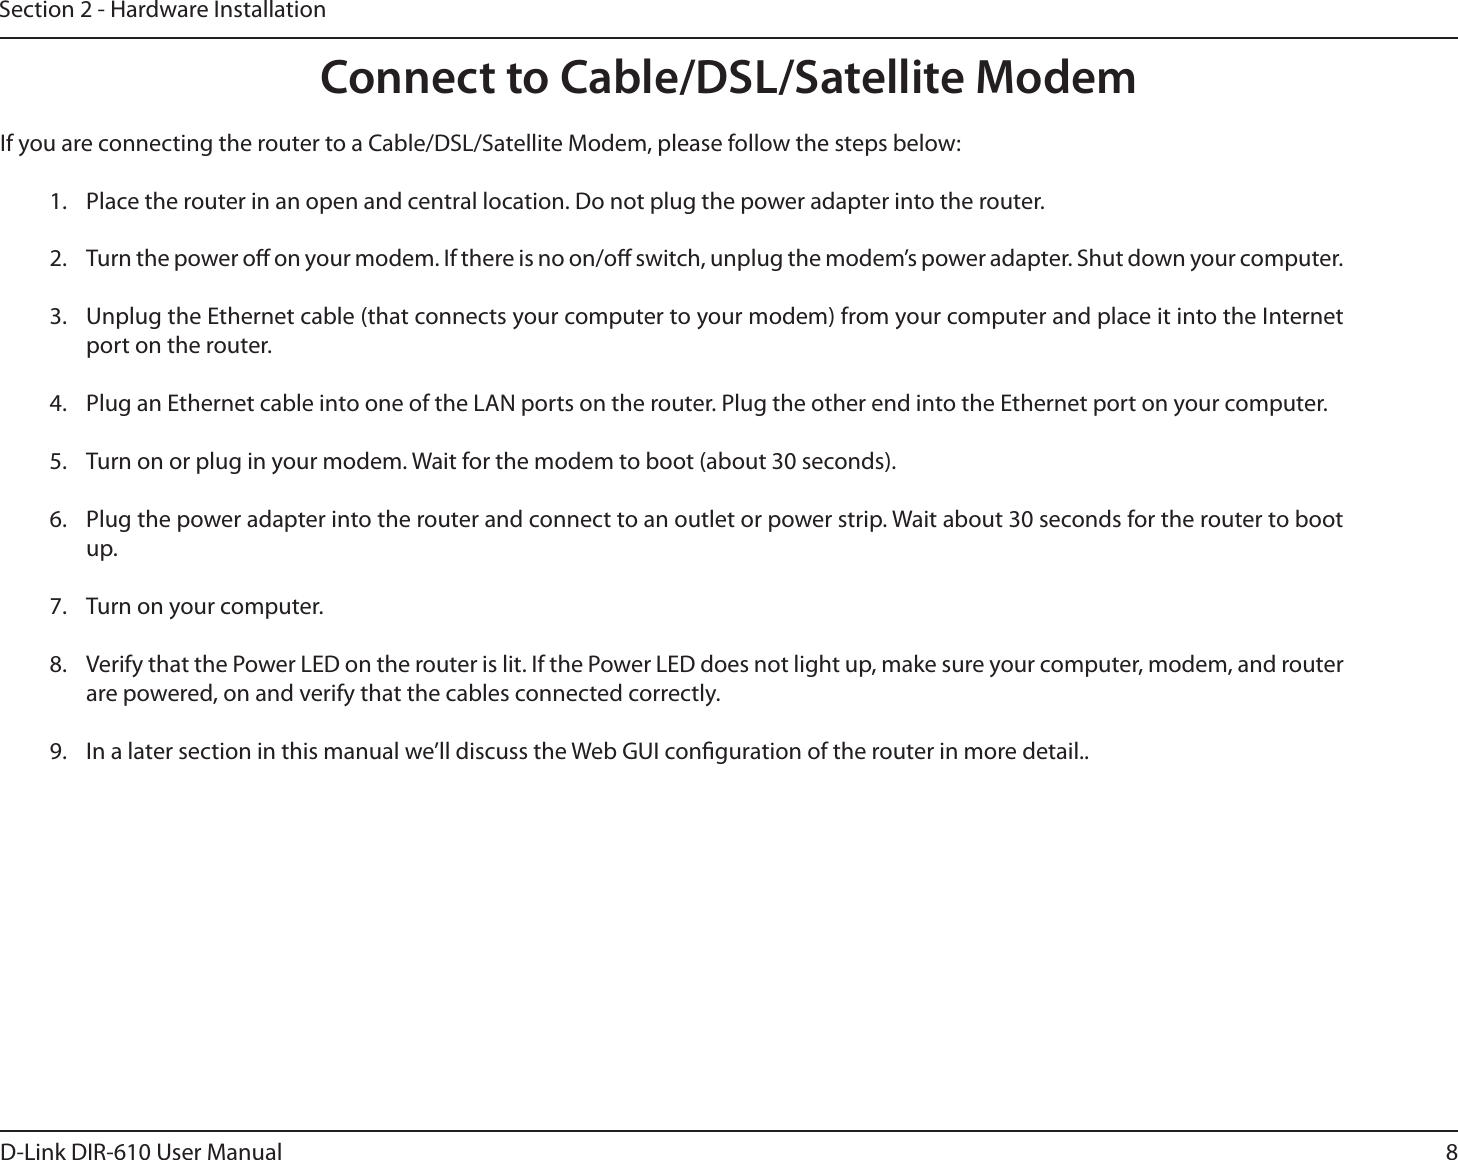 8D-Link DIR-610 User ManualSection 2 - Hardware InstallationConnect to Cable/DSL/Satellite ModemIf you are connecting the router to a Cable/DSL/Satellite Modem, please follow the steps below:1.  Place the router in an open and central location. Do not plug the power adapter into the router.2.  Turn the power o on your modem. If there is no on/o switch, unplug the modem’s power adapter. Shut down your computer.3.  Unplug the Ethernet cable (that connects your computer to your modem) from your computer and place it into the Internet port on the router.4.  Plug an Ethernet cable into one of the LAN ports on the router. Plug the other end into the Ethernet port on your computer.5.  Turn on or plug in your modem. Wait for the modem to boot (about 30 seconds).6.  Plug the power adapter into the router and connect to an outlet or power strip. Wait about 30 seconds for the router to boot up.7.  Turn on your computer.8.  Verify that the Power LED on the router is lit. If the Power LED does not light up, make sure your computer, modem, and router are powered, on and verify that the cables connected correctly.9.  In a later section in this manual we’ll discuss the Web GUI conguration of the router in more detail..